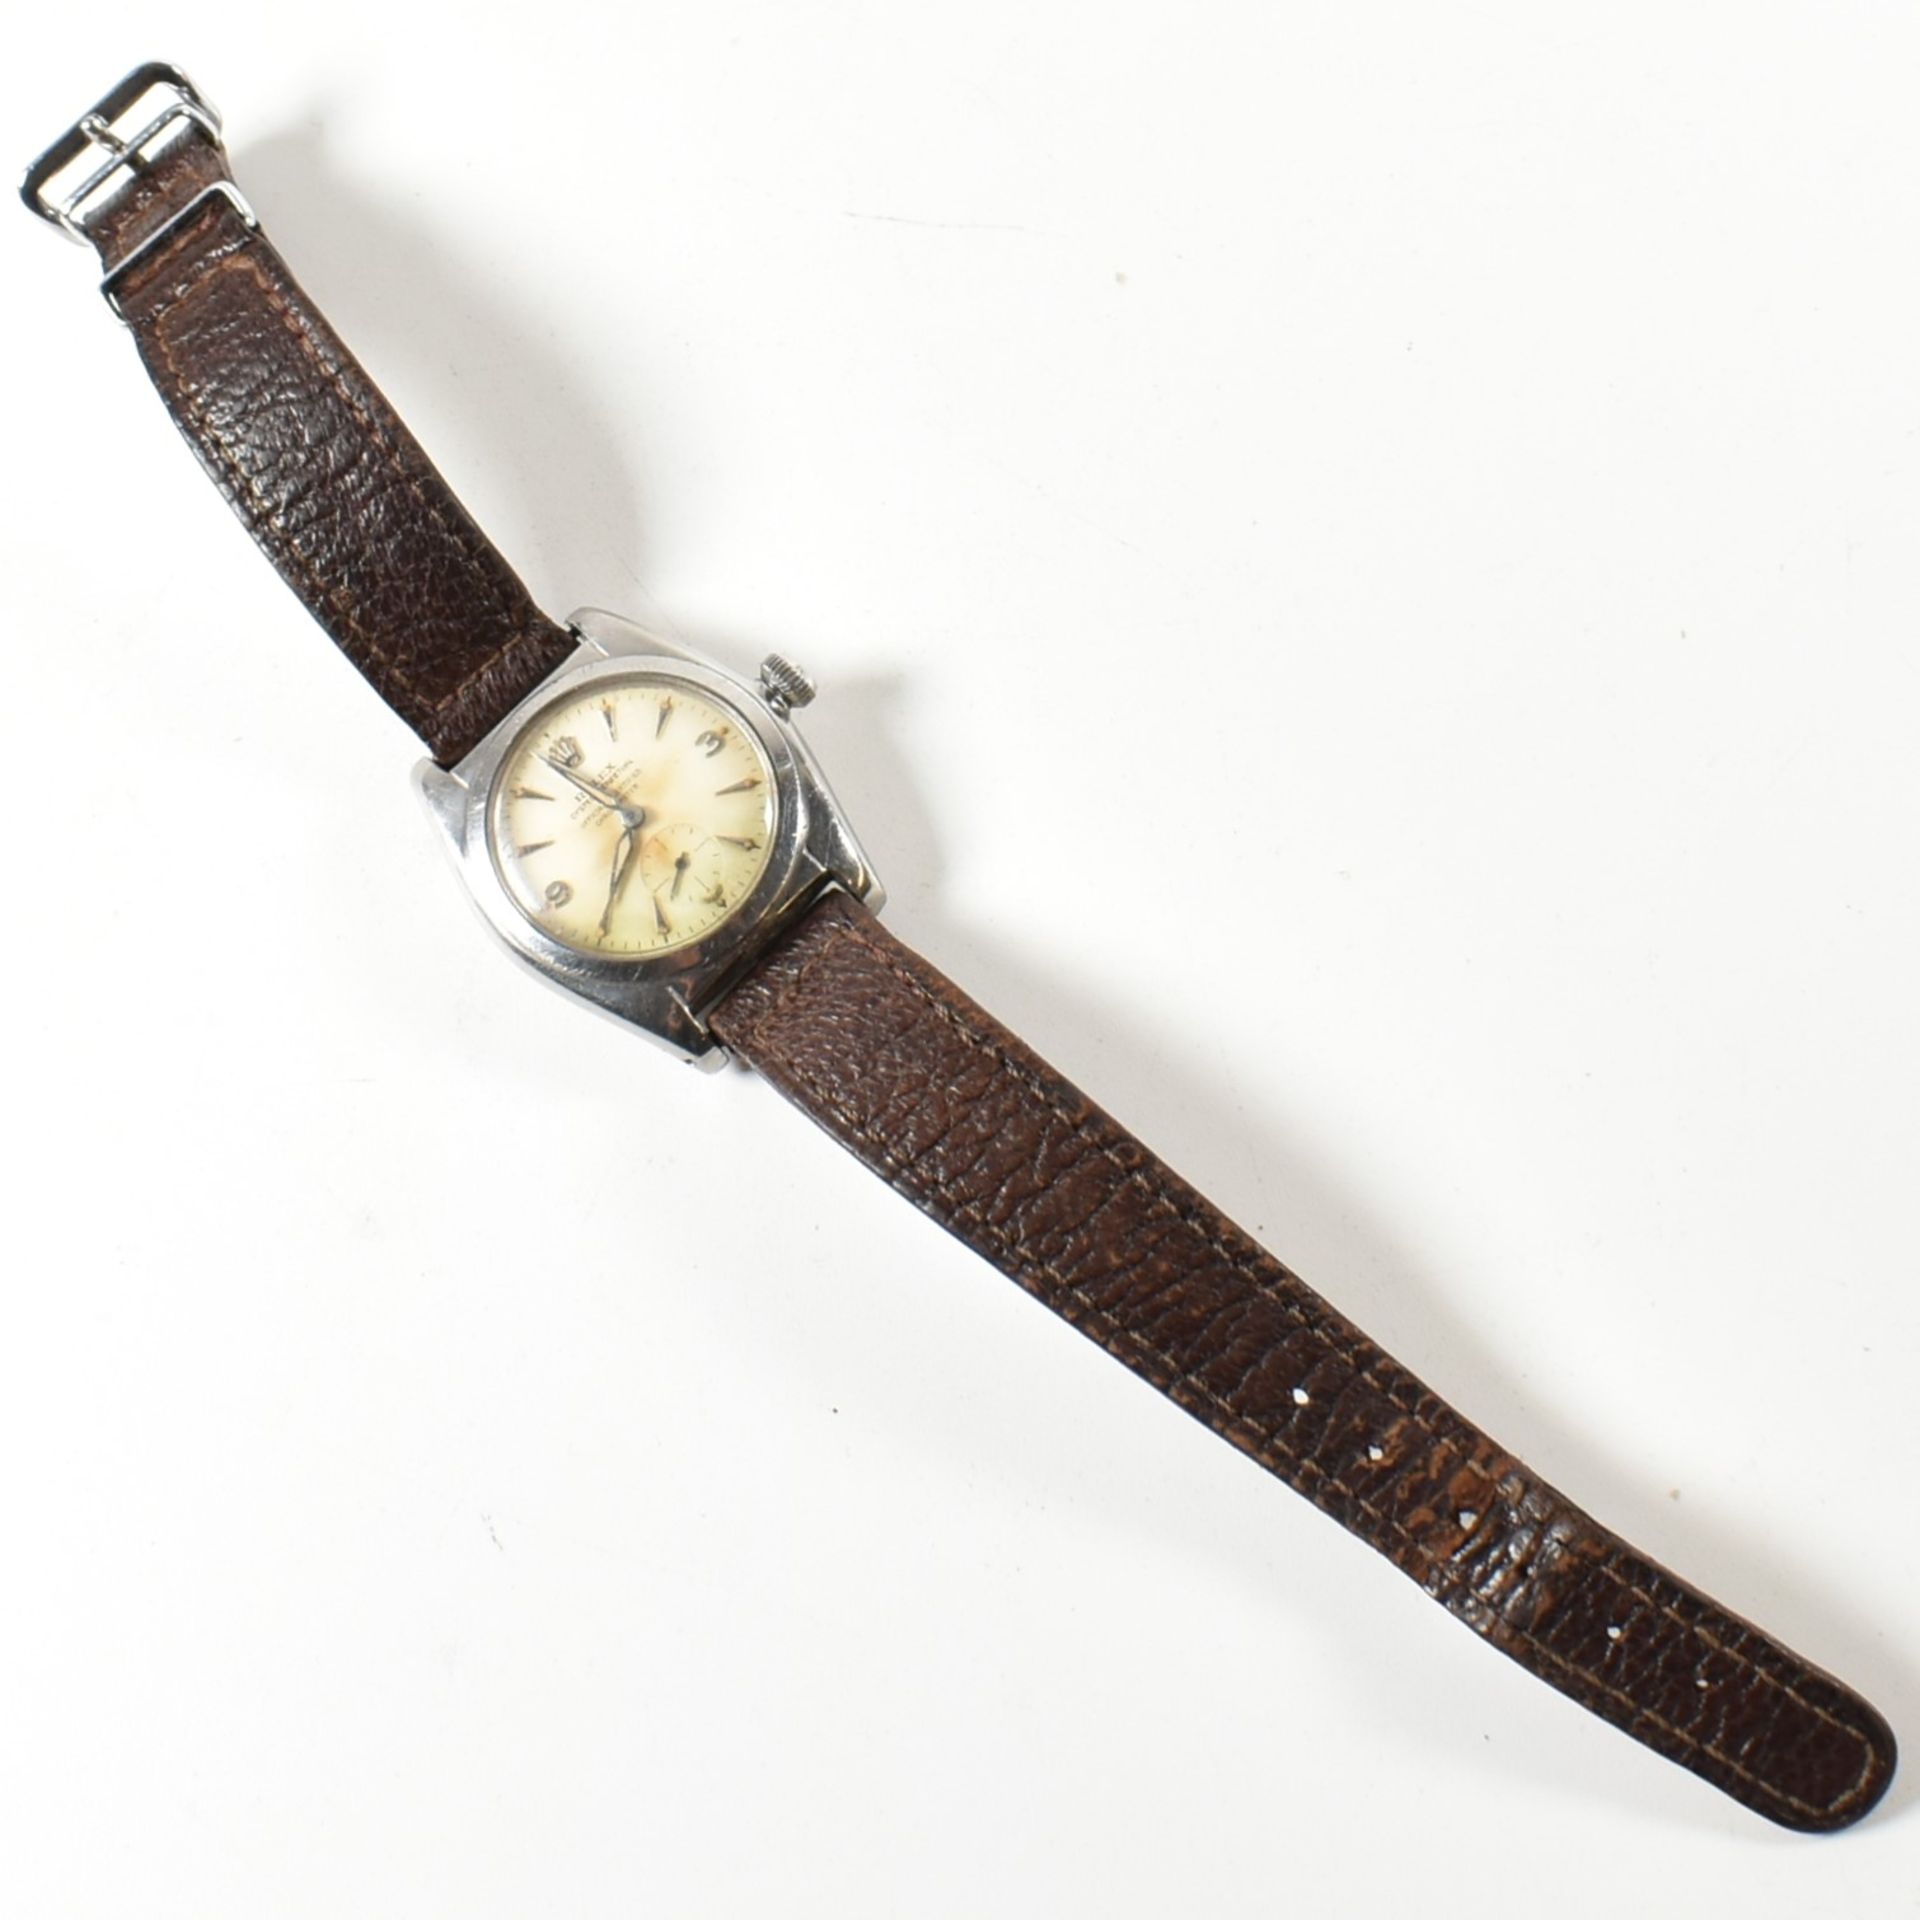 ROLEX OYSTER PERPETUAL WRISTWATCH WITH LEATHER STRAP - Image 2 of 6